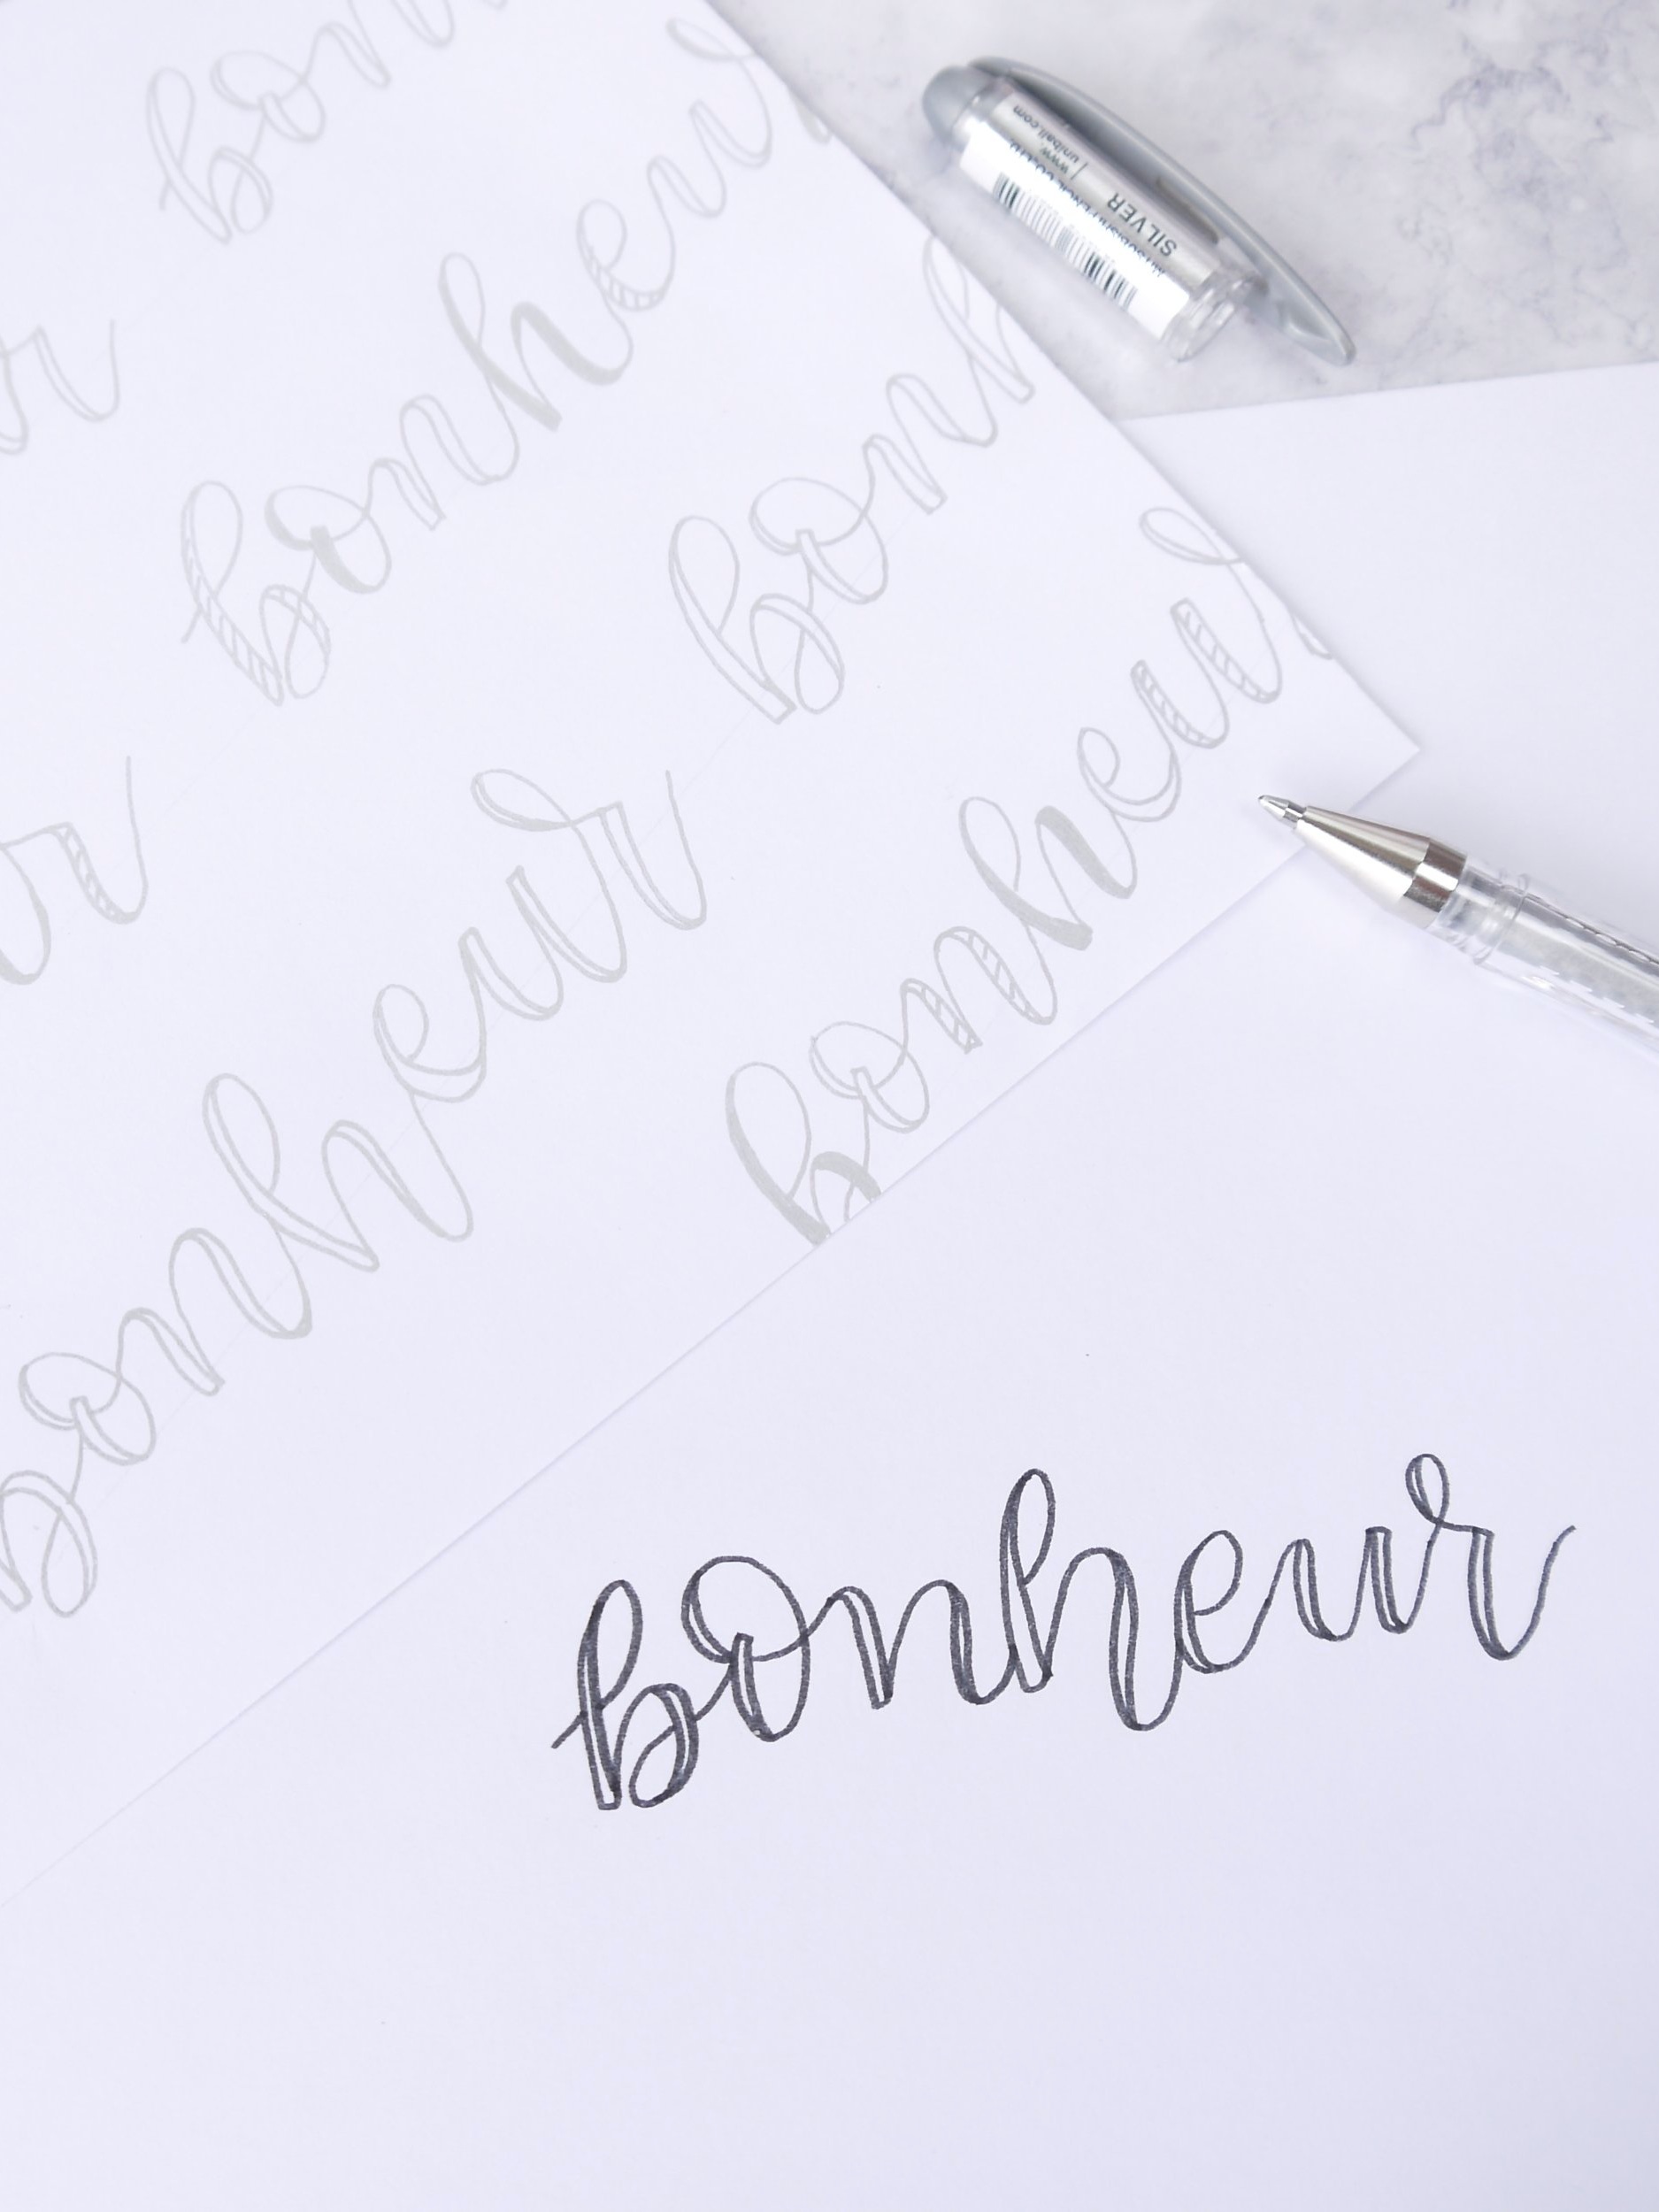 How to Write Calligraphy with a Fountain Pen - Craftfoxes